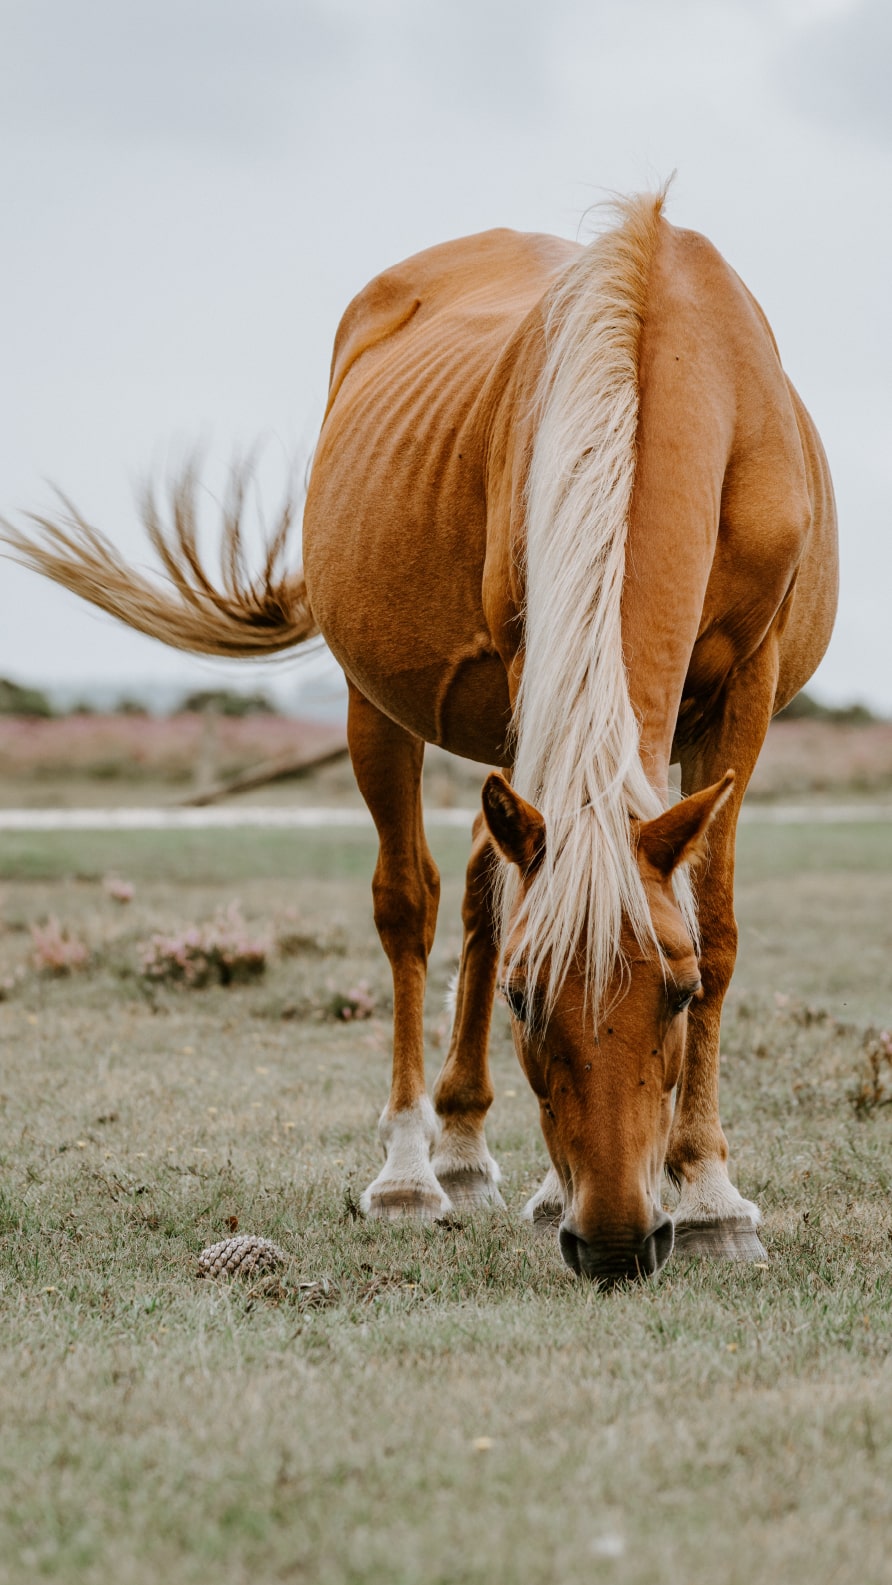 iPhone wallpapers featuring horses